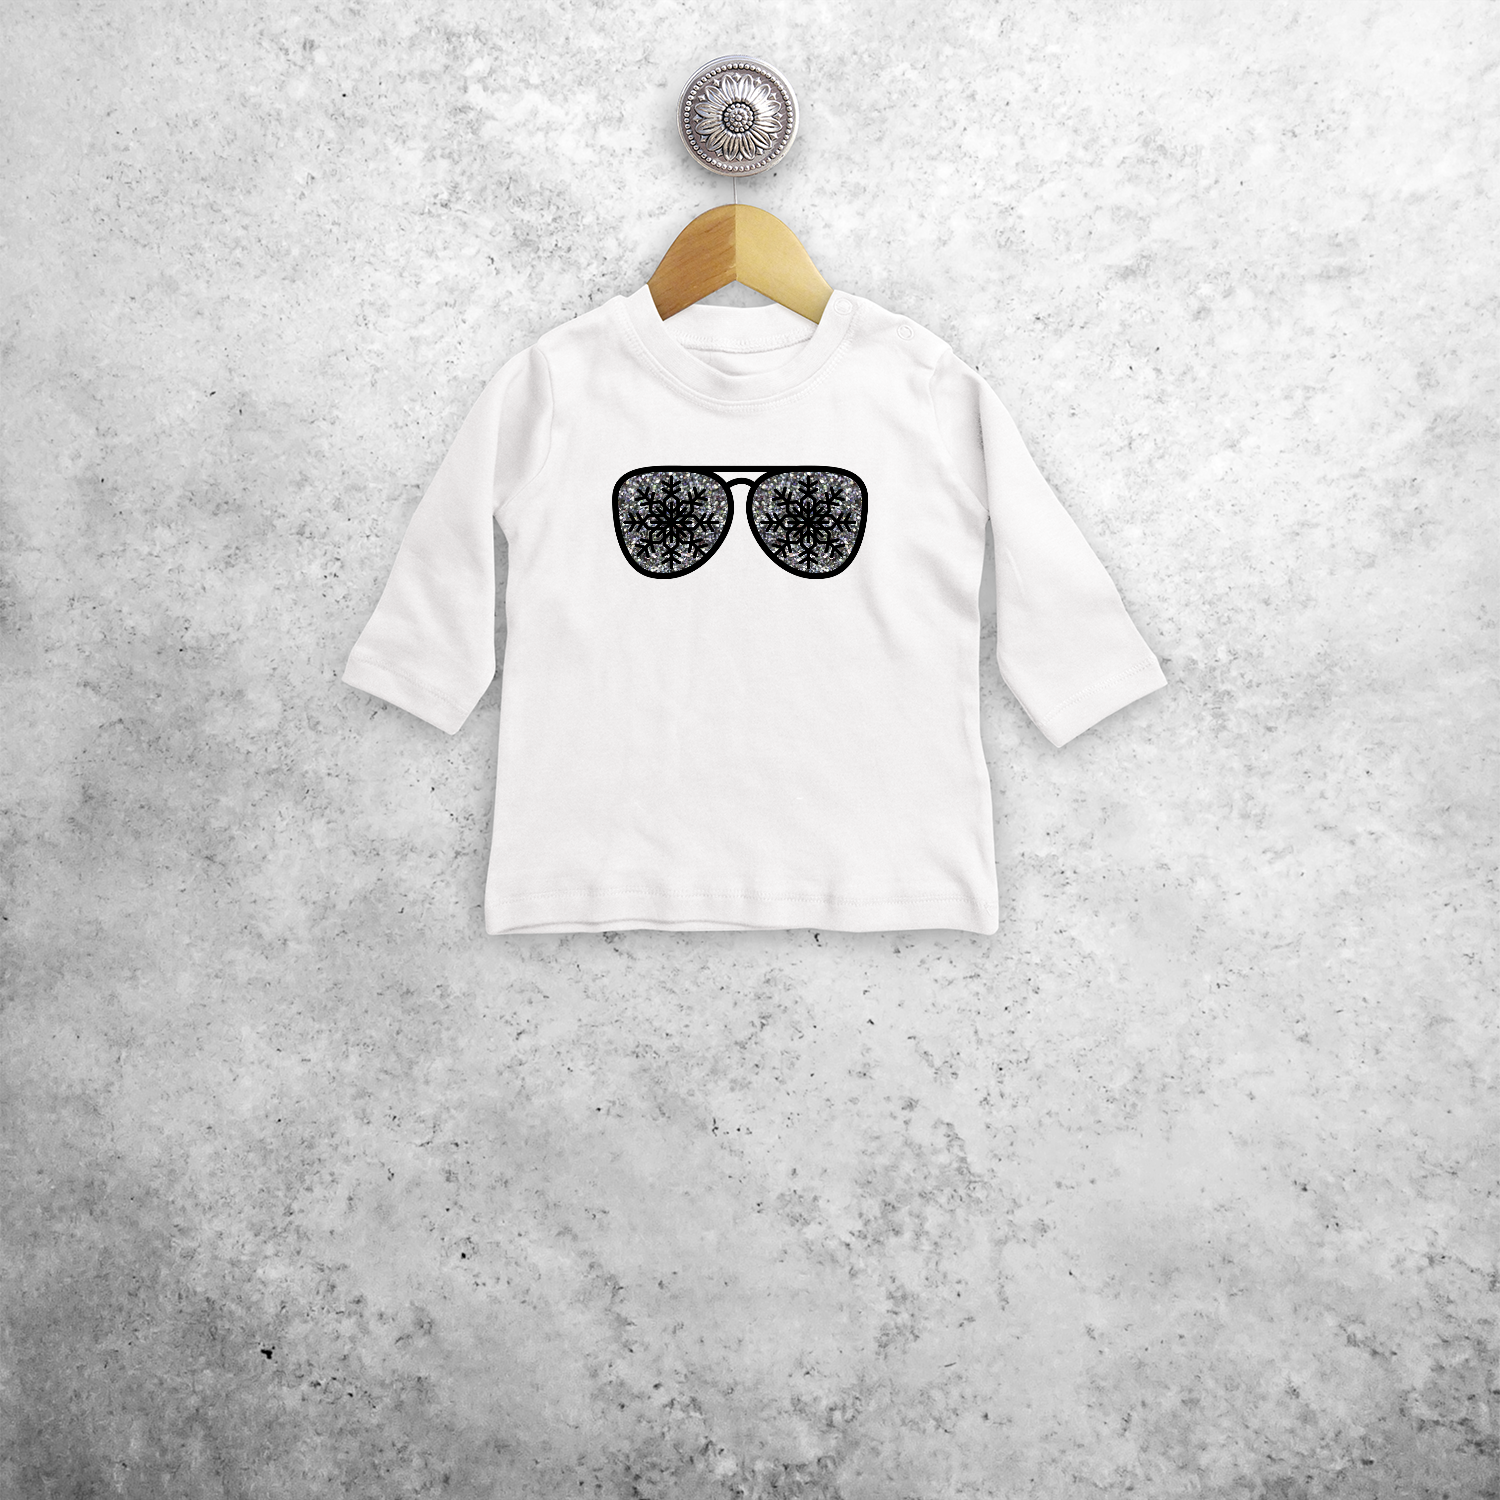 Baby or toddler shirt with long sleeves, with glitter snow star glasses print by KMLeon.